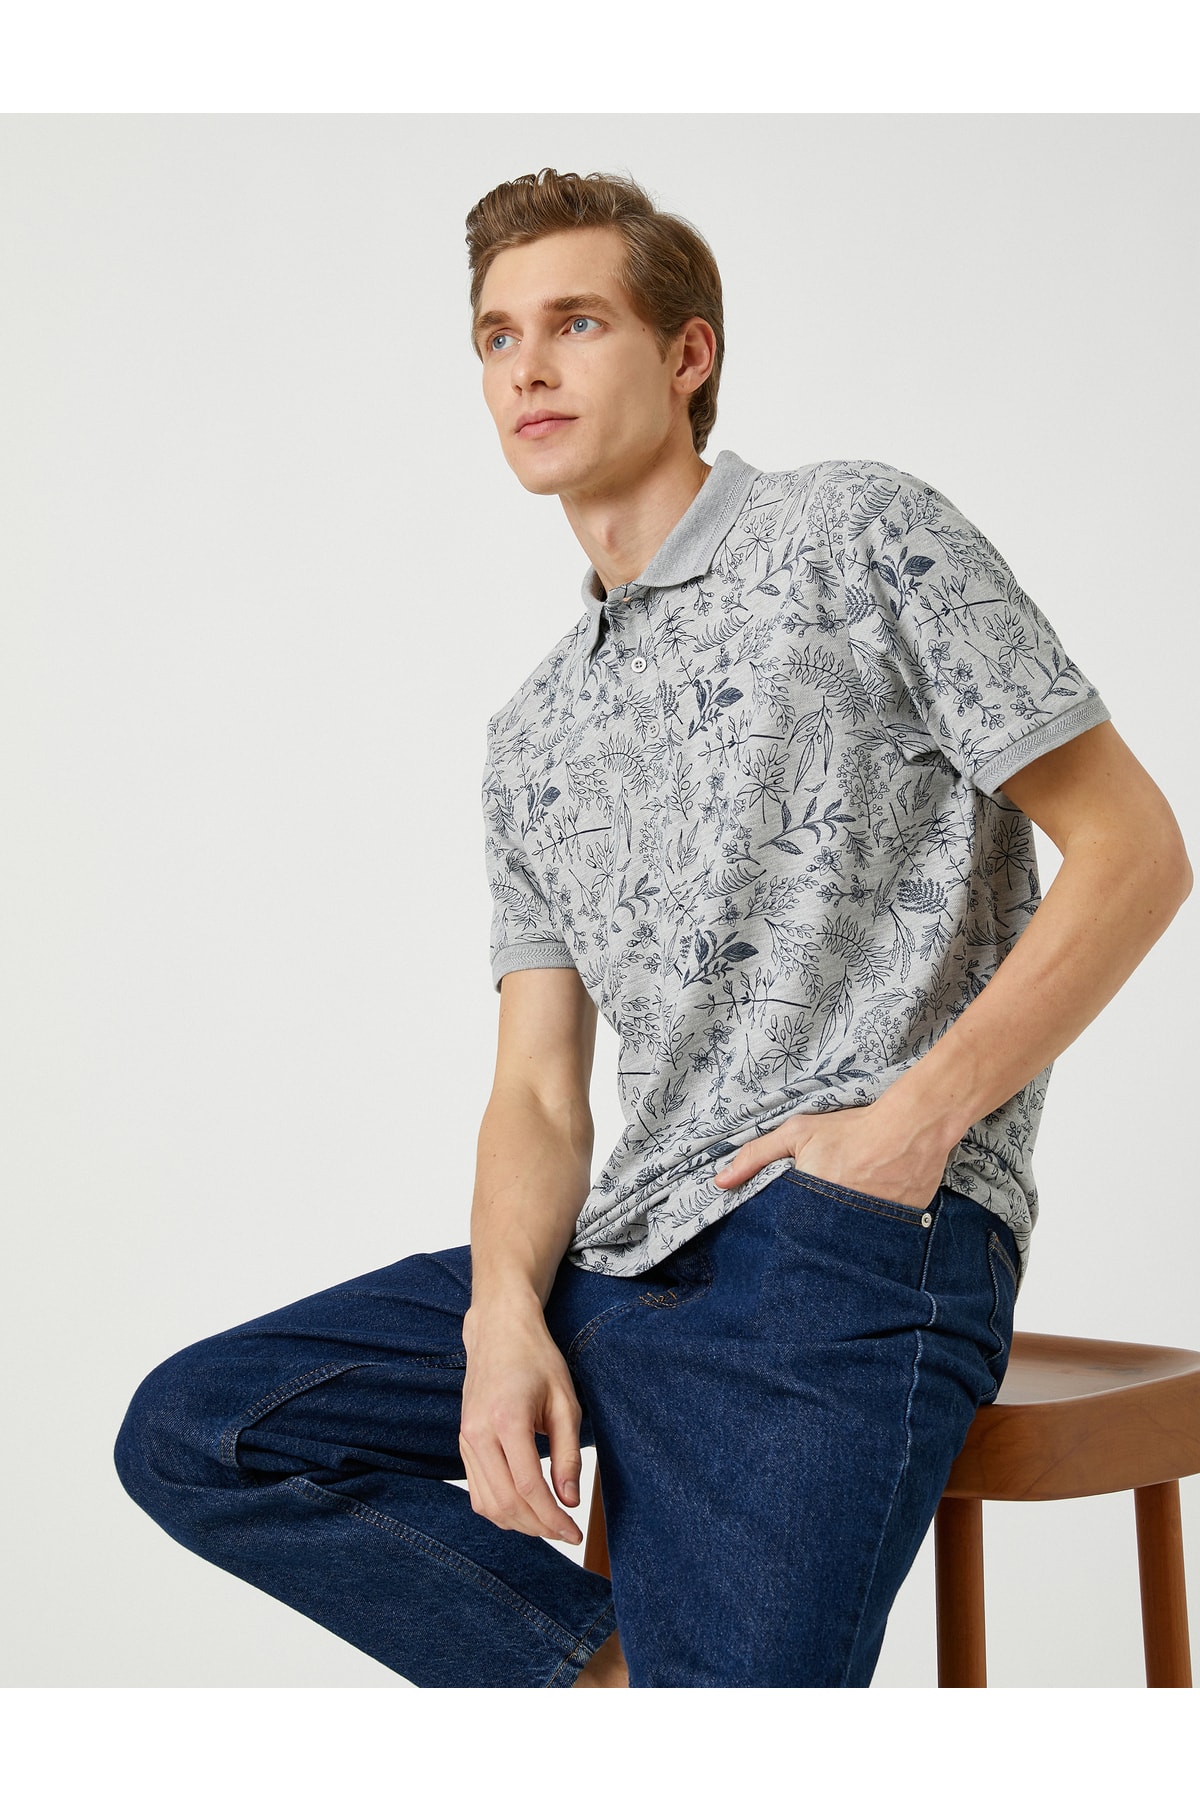 Levně Koton Floral Slim-fit Polo T-Shirt, Short Sleeves with Buttons.